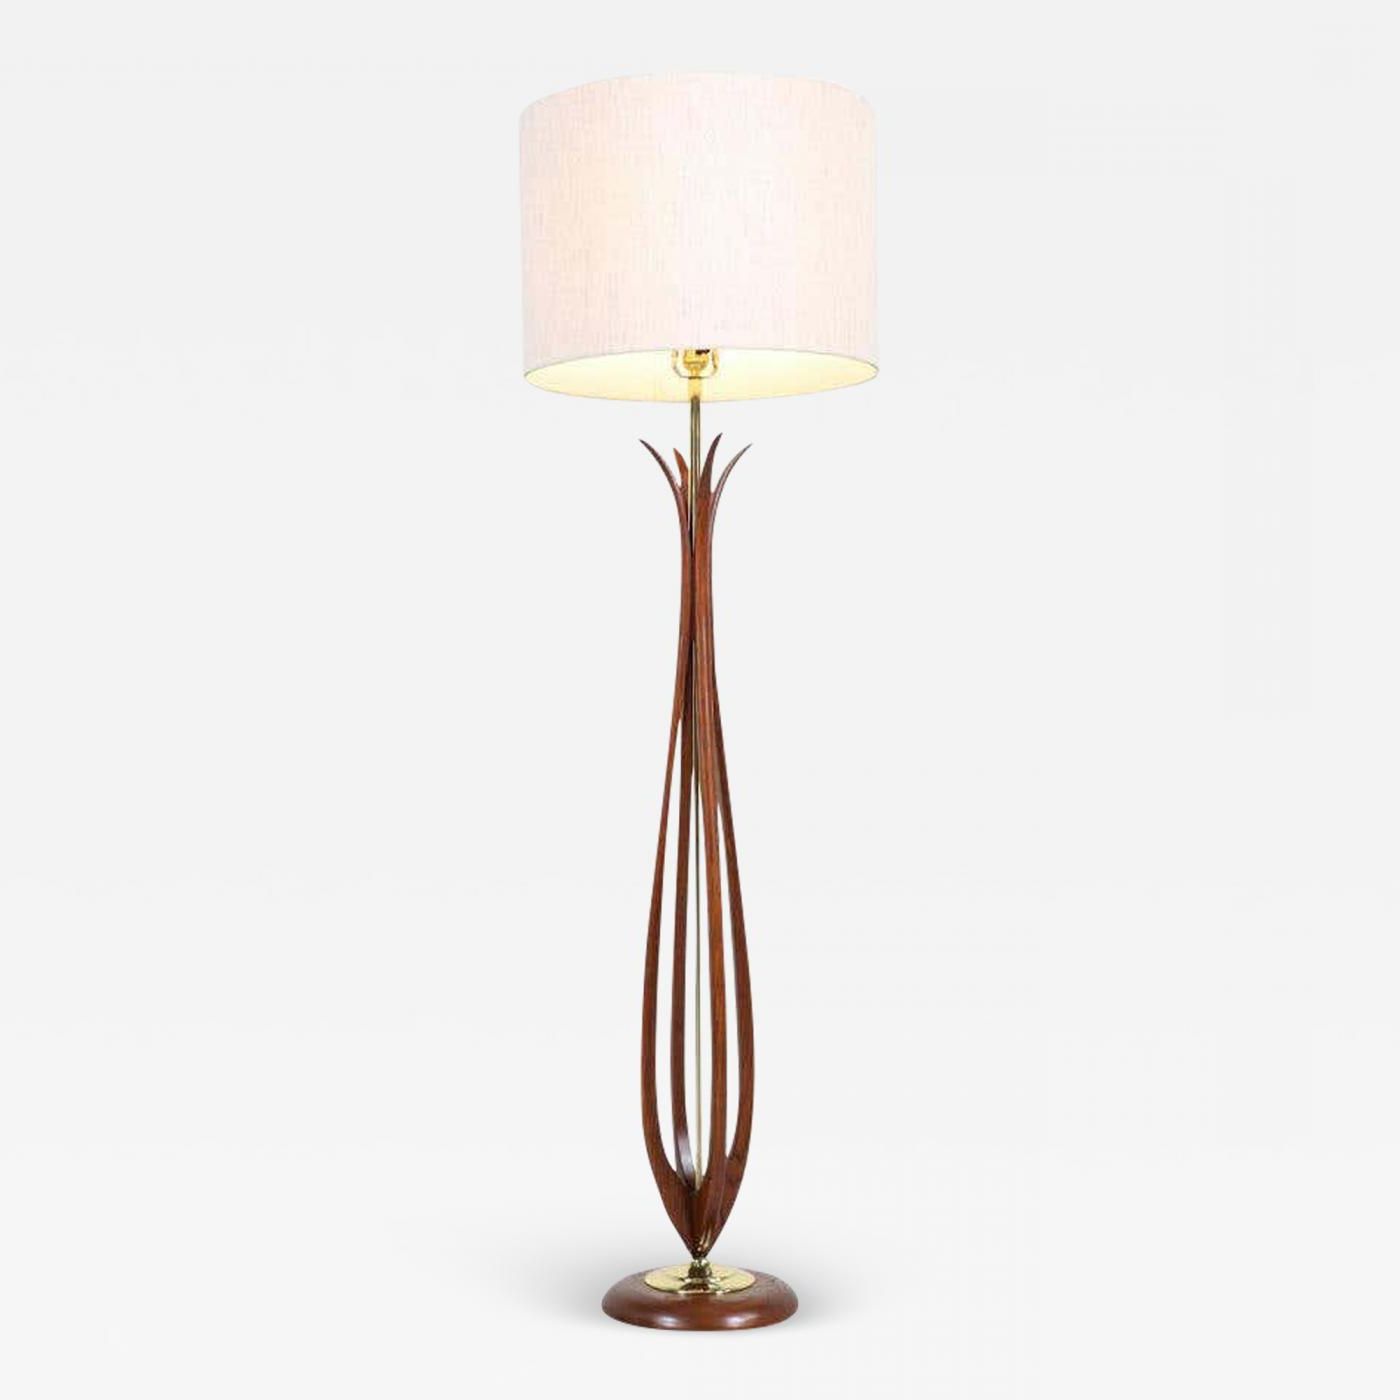 Mid Century Modern Sculpted Walnut Floor Lamp With Brass Accents Intended For Widely Used Walnut Standing Lamps (View 6 of 10)